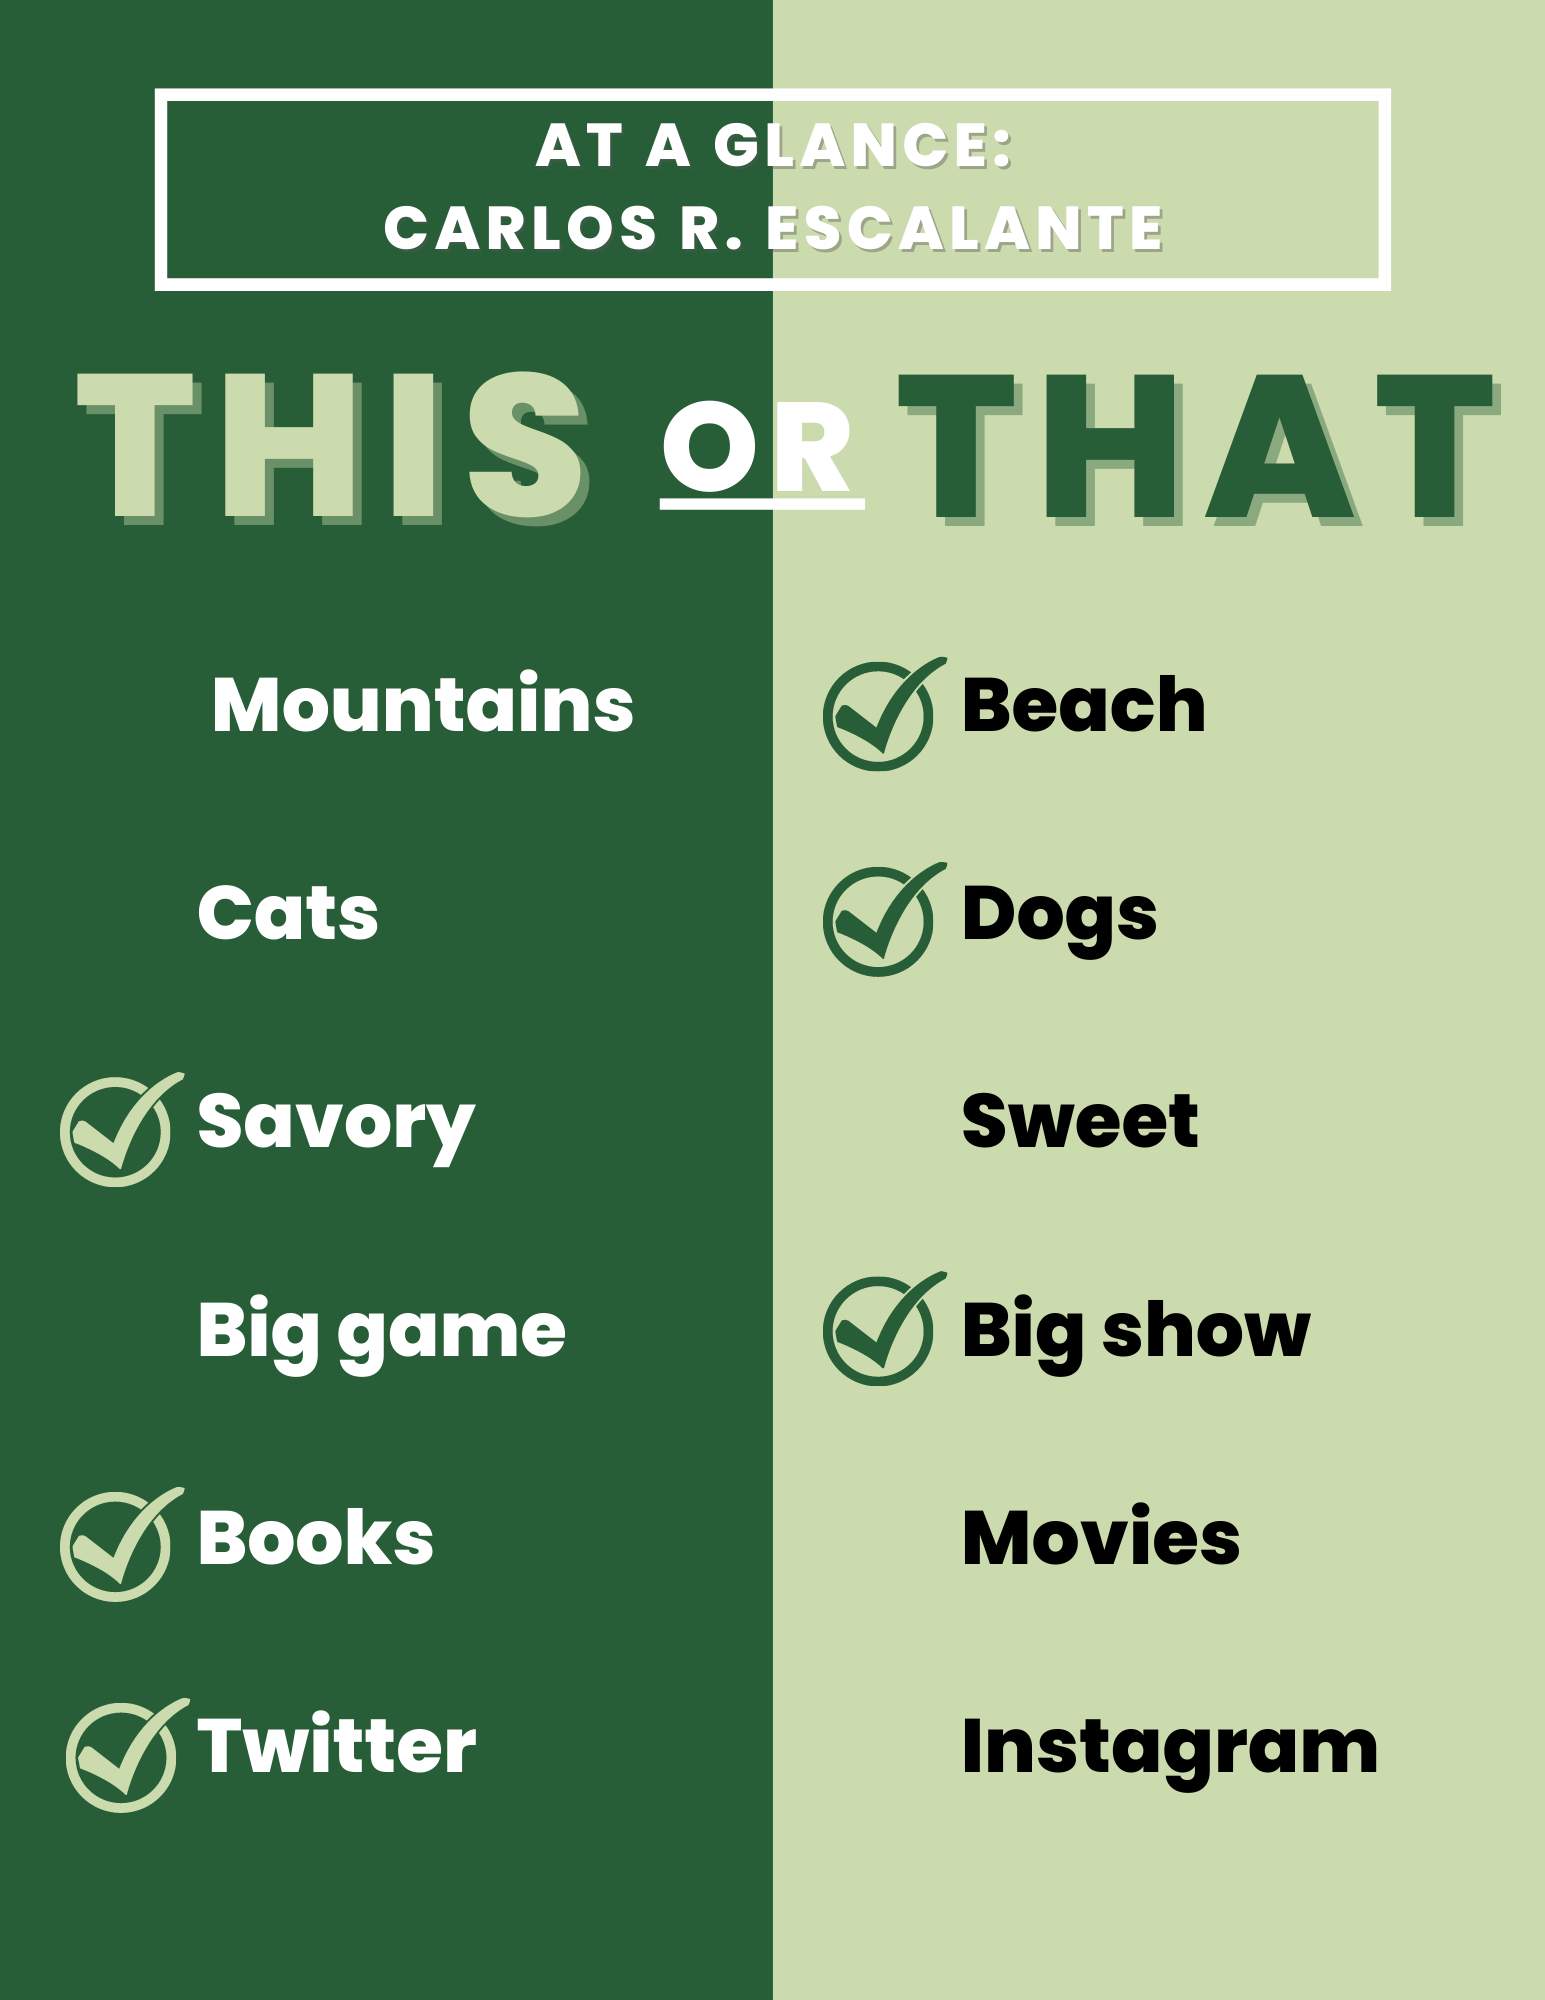 Split down the middle between dark green and light green. Text reads, "At A Glance: Carlos R. Escalante. This or That." Escalante chooses beach over mountains, dogs over cats, savory over sweet, big show over big game, books over movies and Twitter over Instagram.